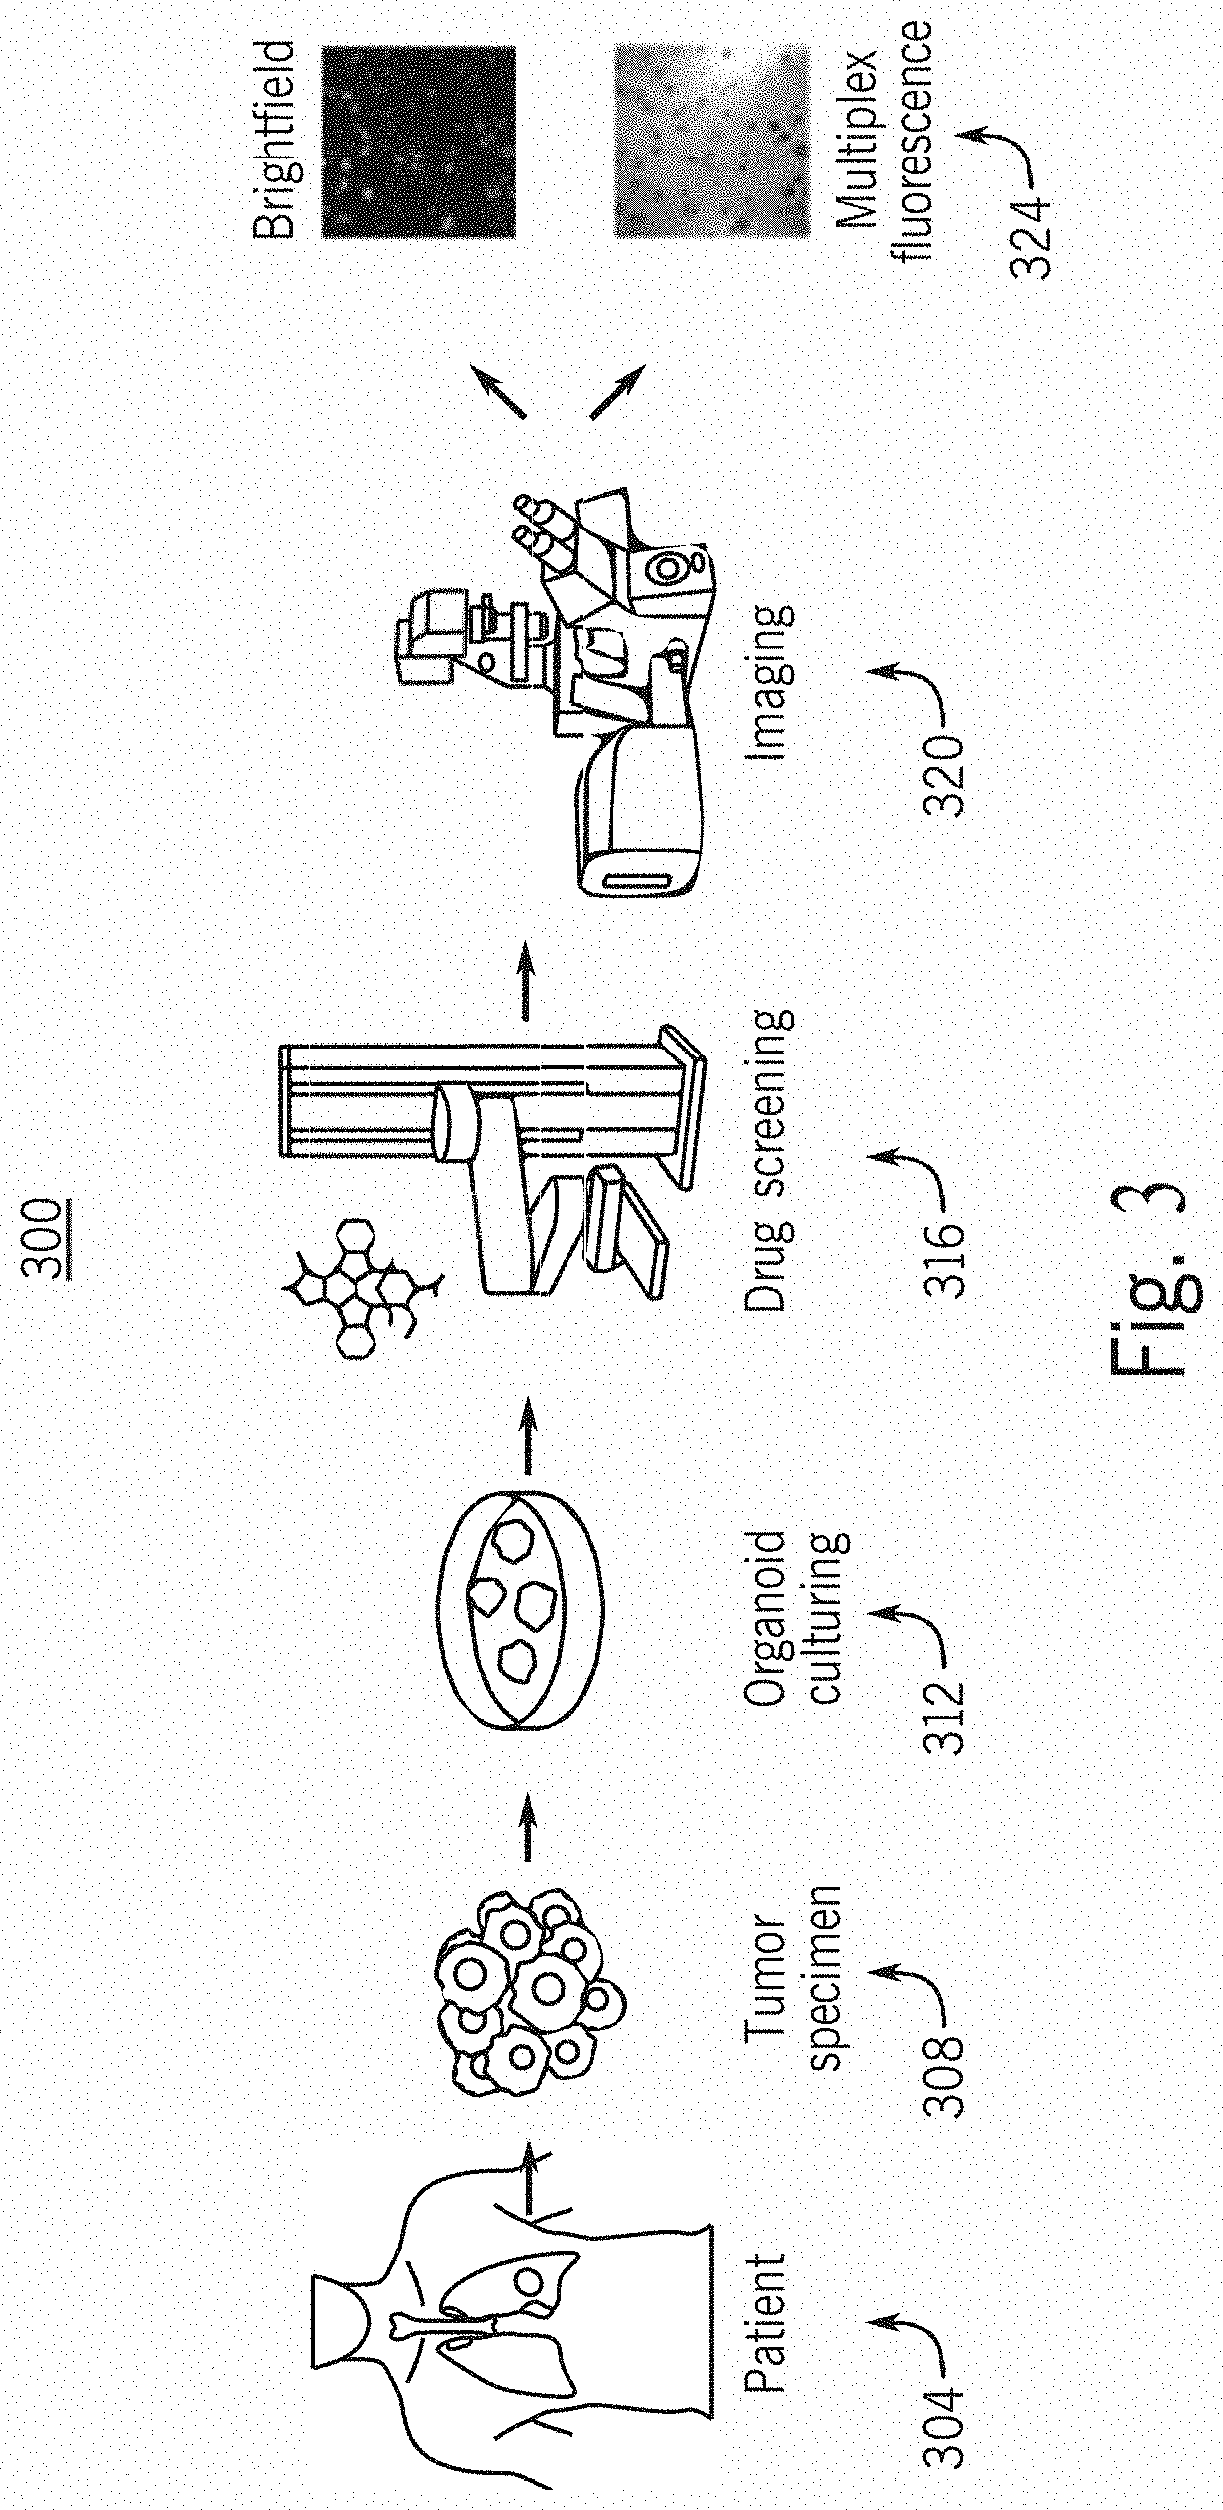 Artificial flourescent image systems and methods